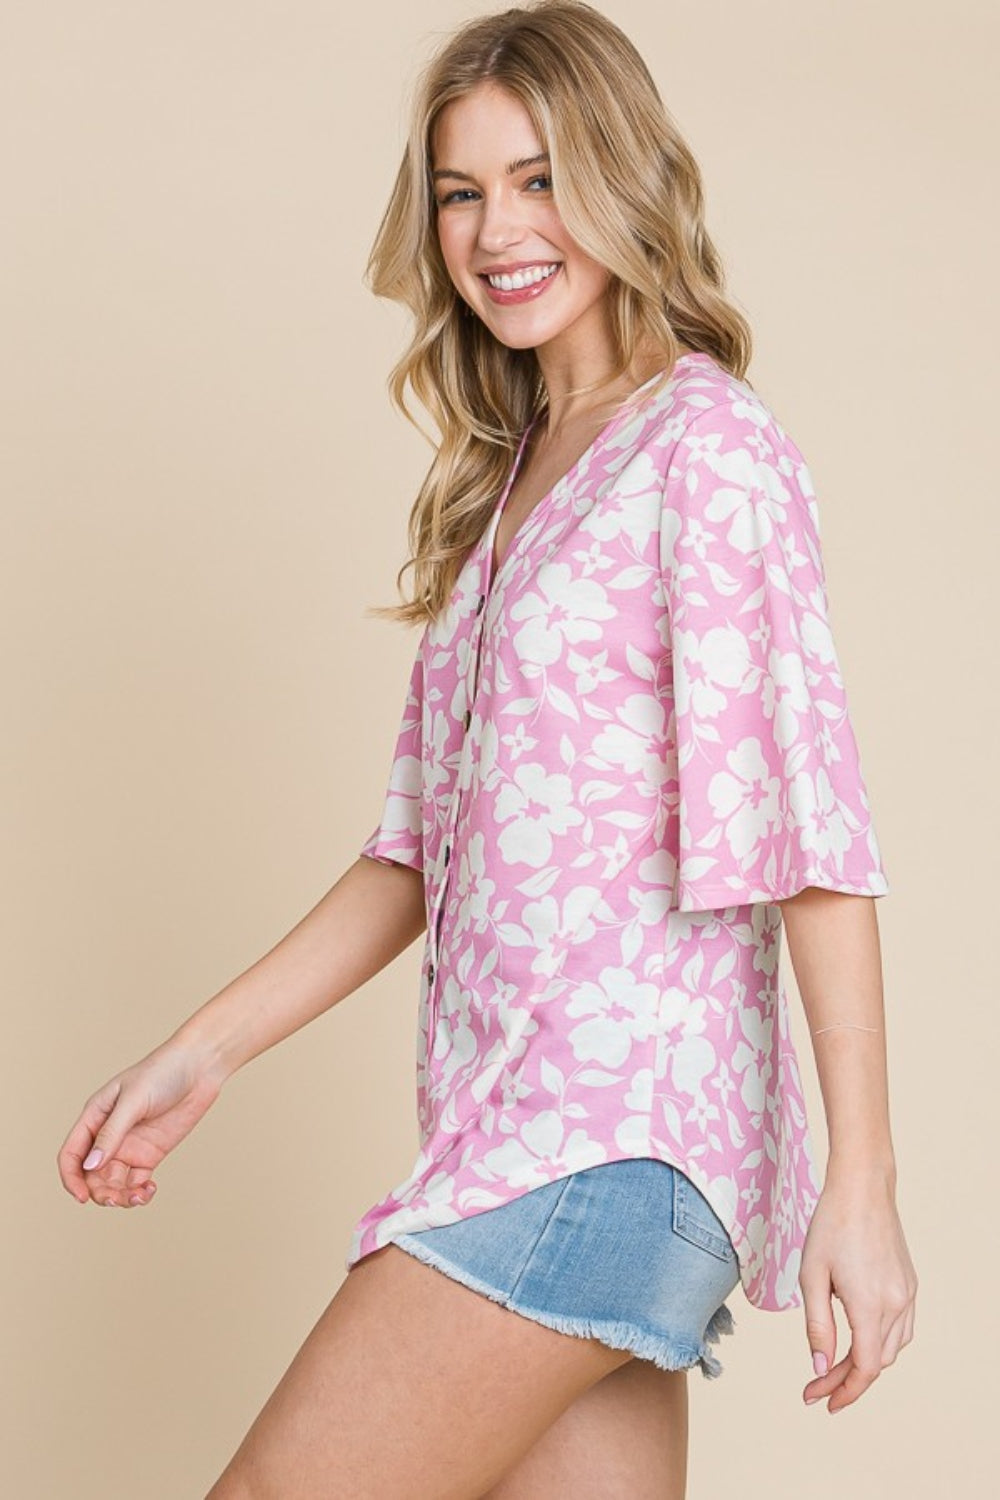 The Floral Decorative Button V-Neck Top is a charming and elegant piece that combines feminine florals with stylish details. Featuring decorative buttons and a flattering v-neckline, this top exudes a sophisticated and fashion-forward look. S-XL